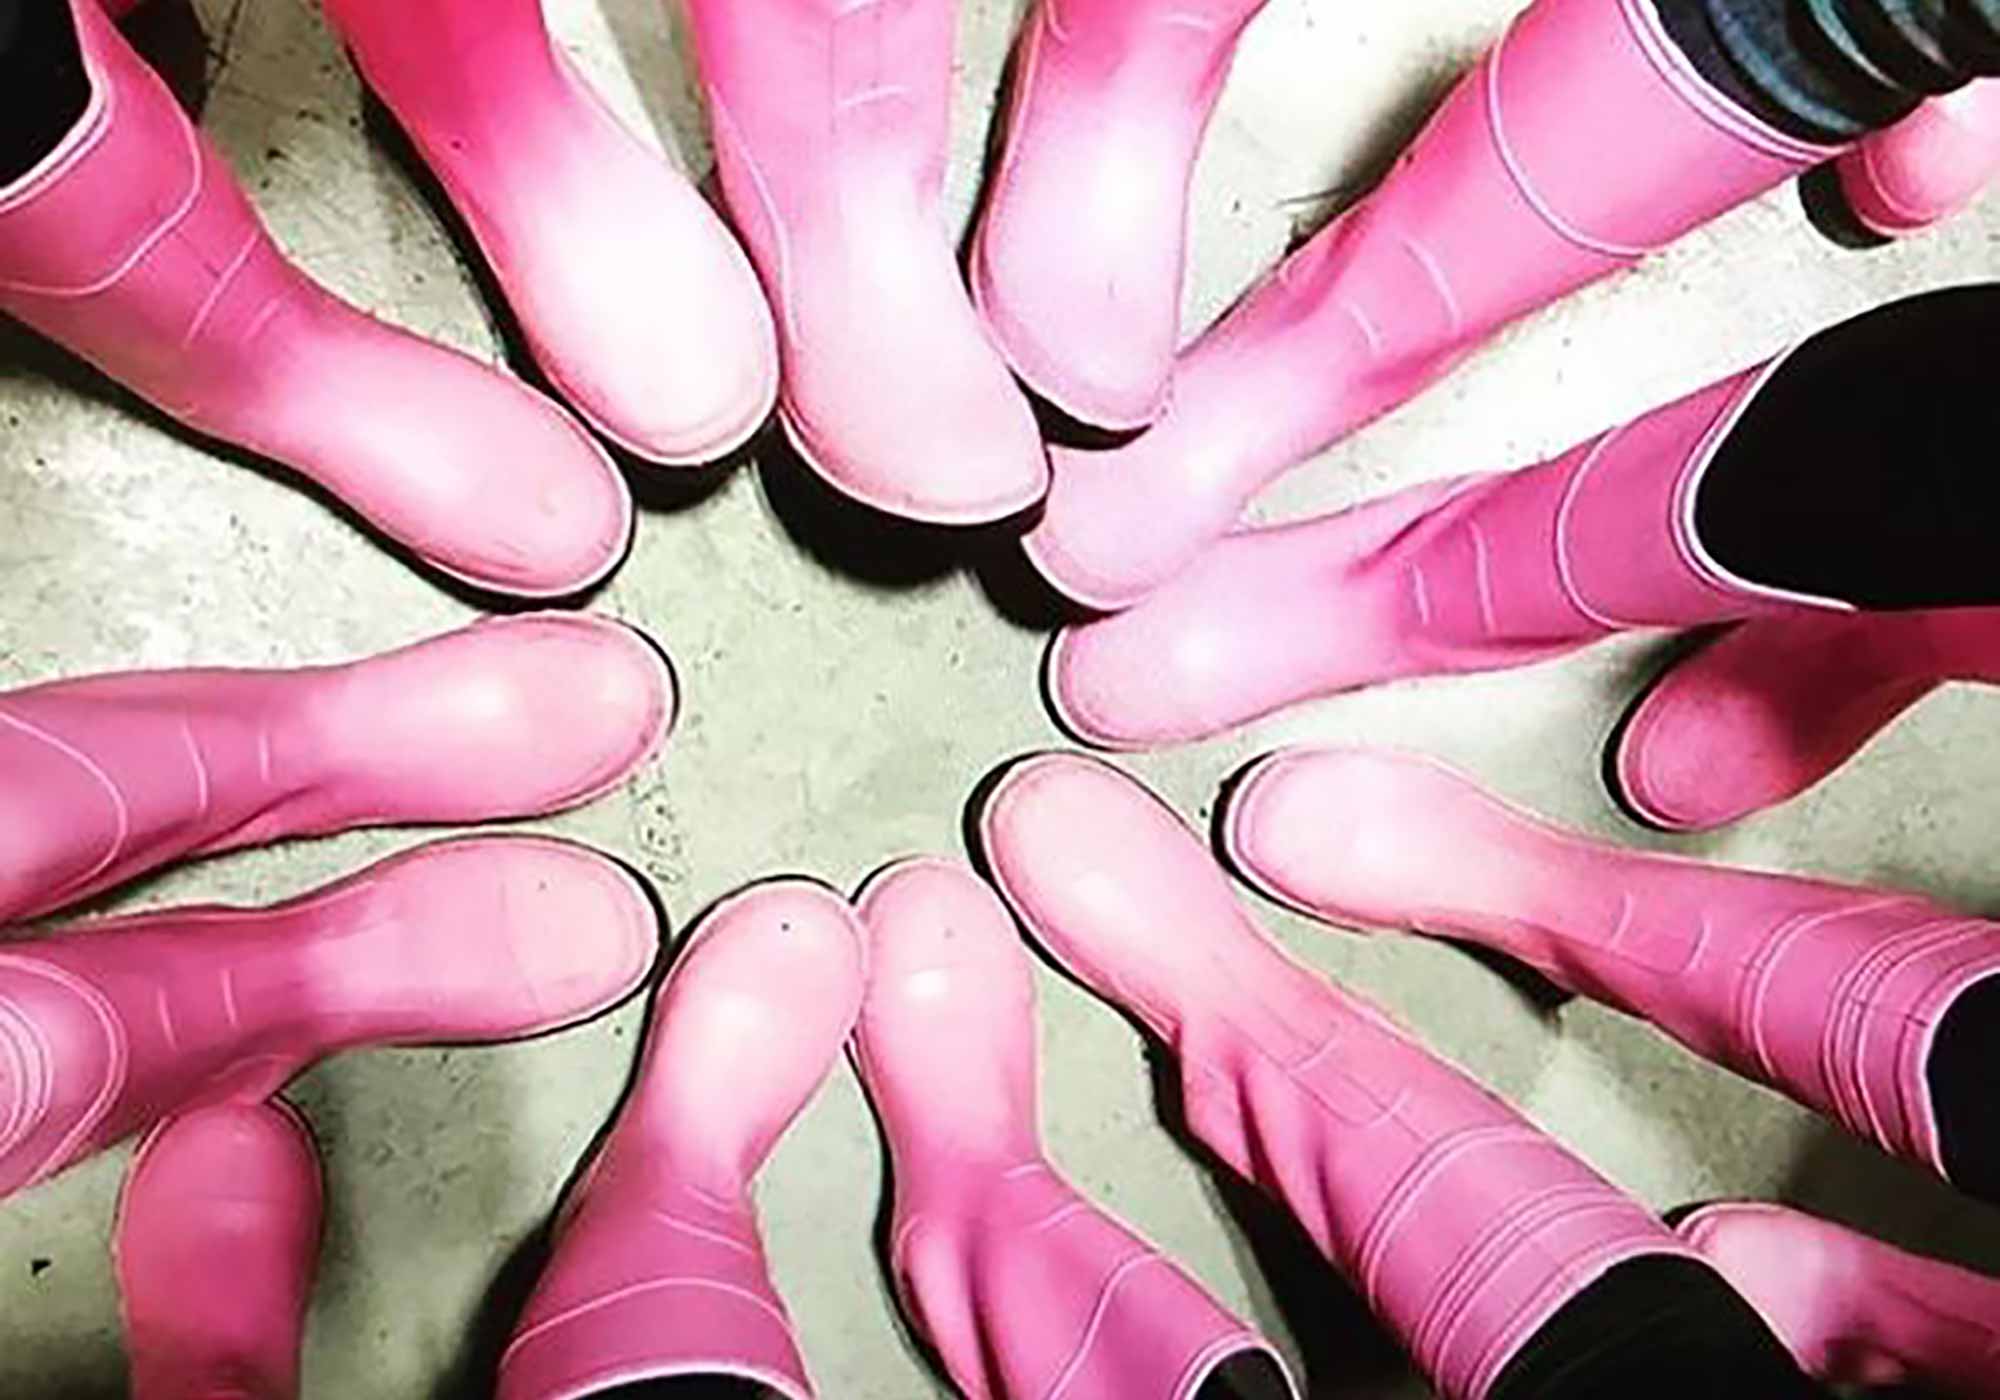 Attend Beers With(out) Beards, Support the Pink Boots Society